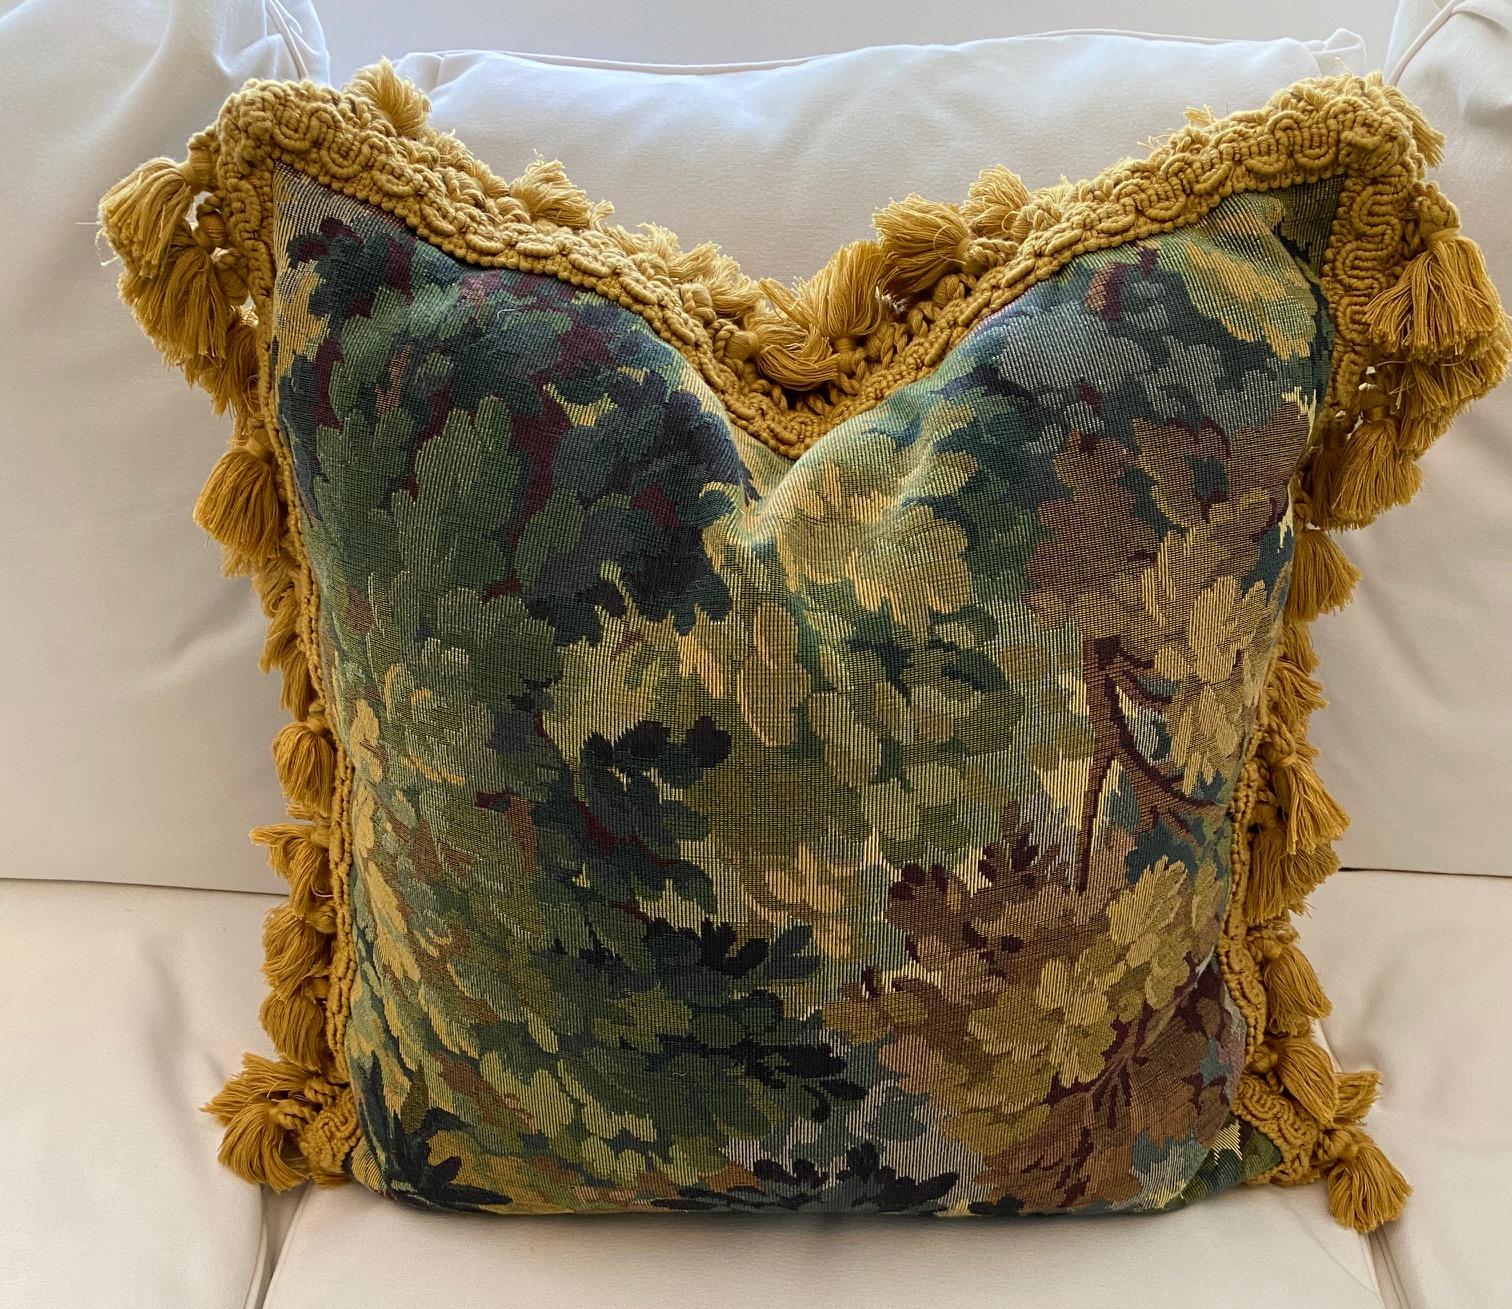 Decorative pair of verdure tapestry style cushions with gold fringe.
Measures: 20